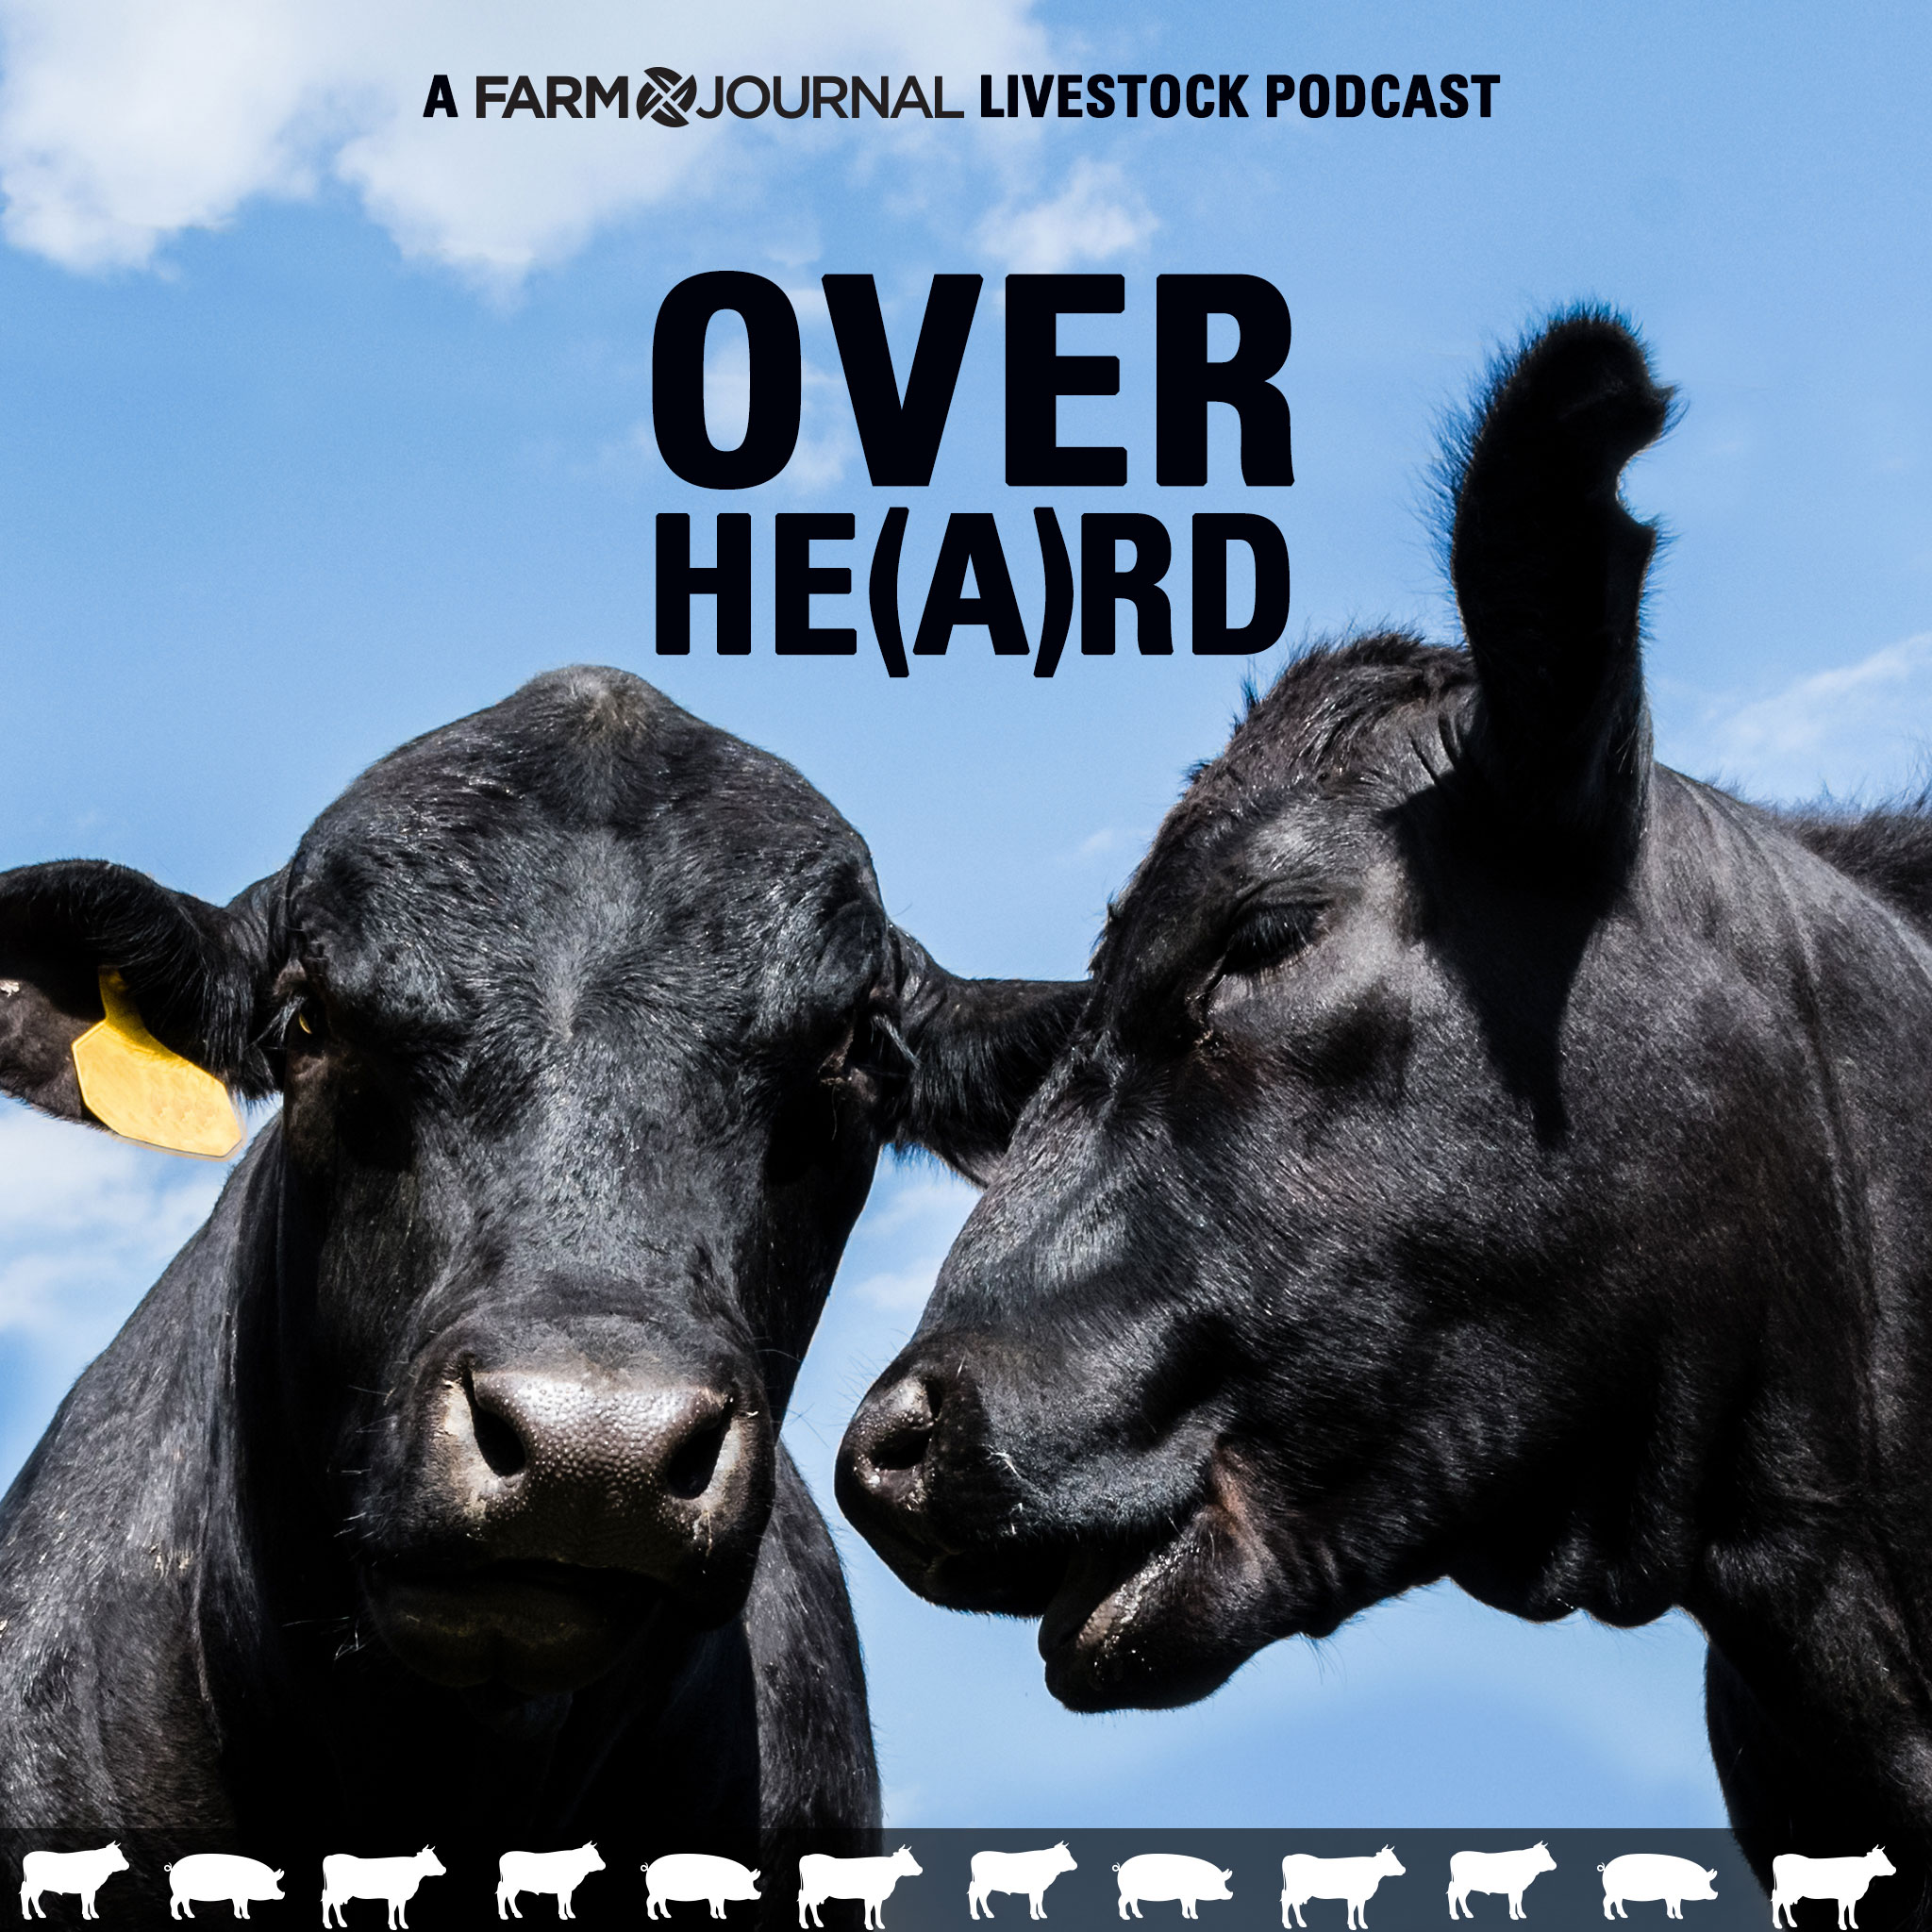 Overhe(a)rd: Livestock Show Cancellations & Lessons Learned